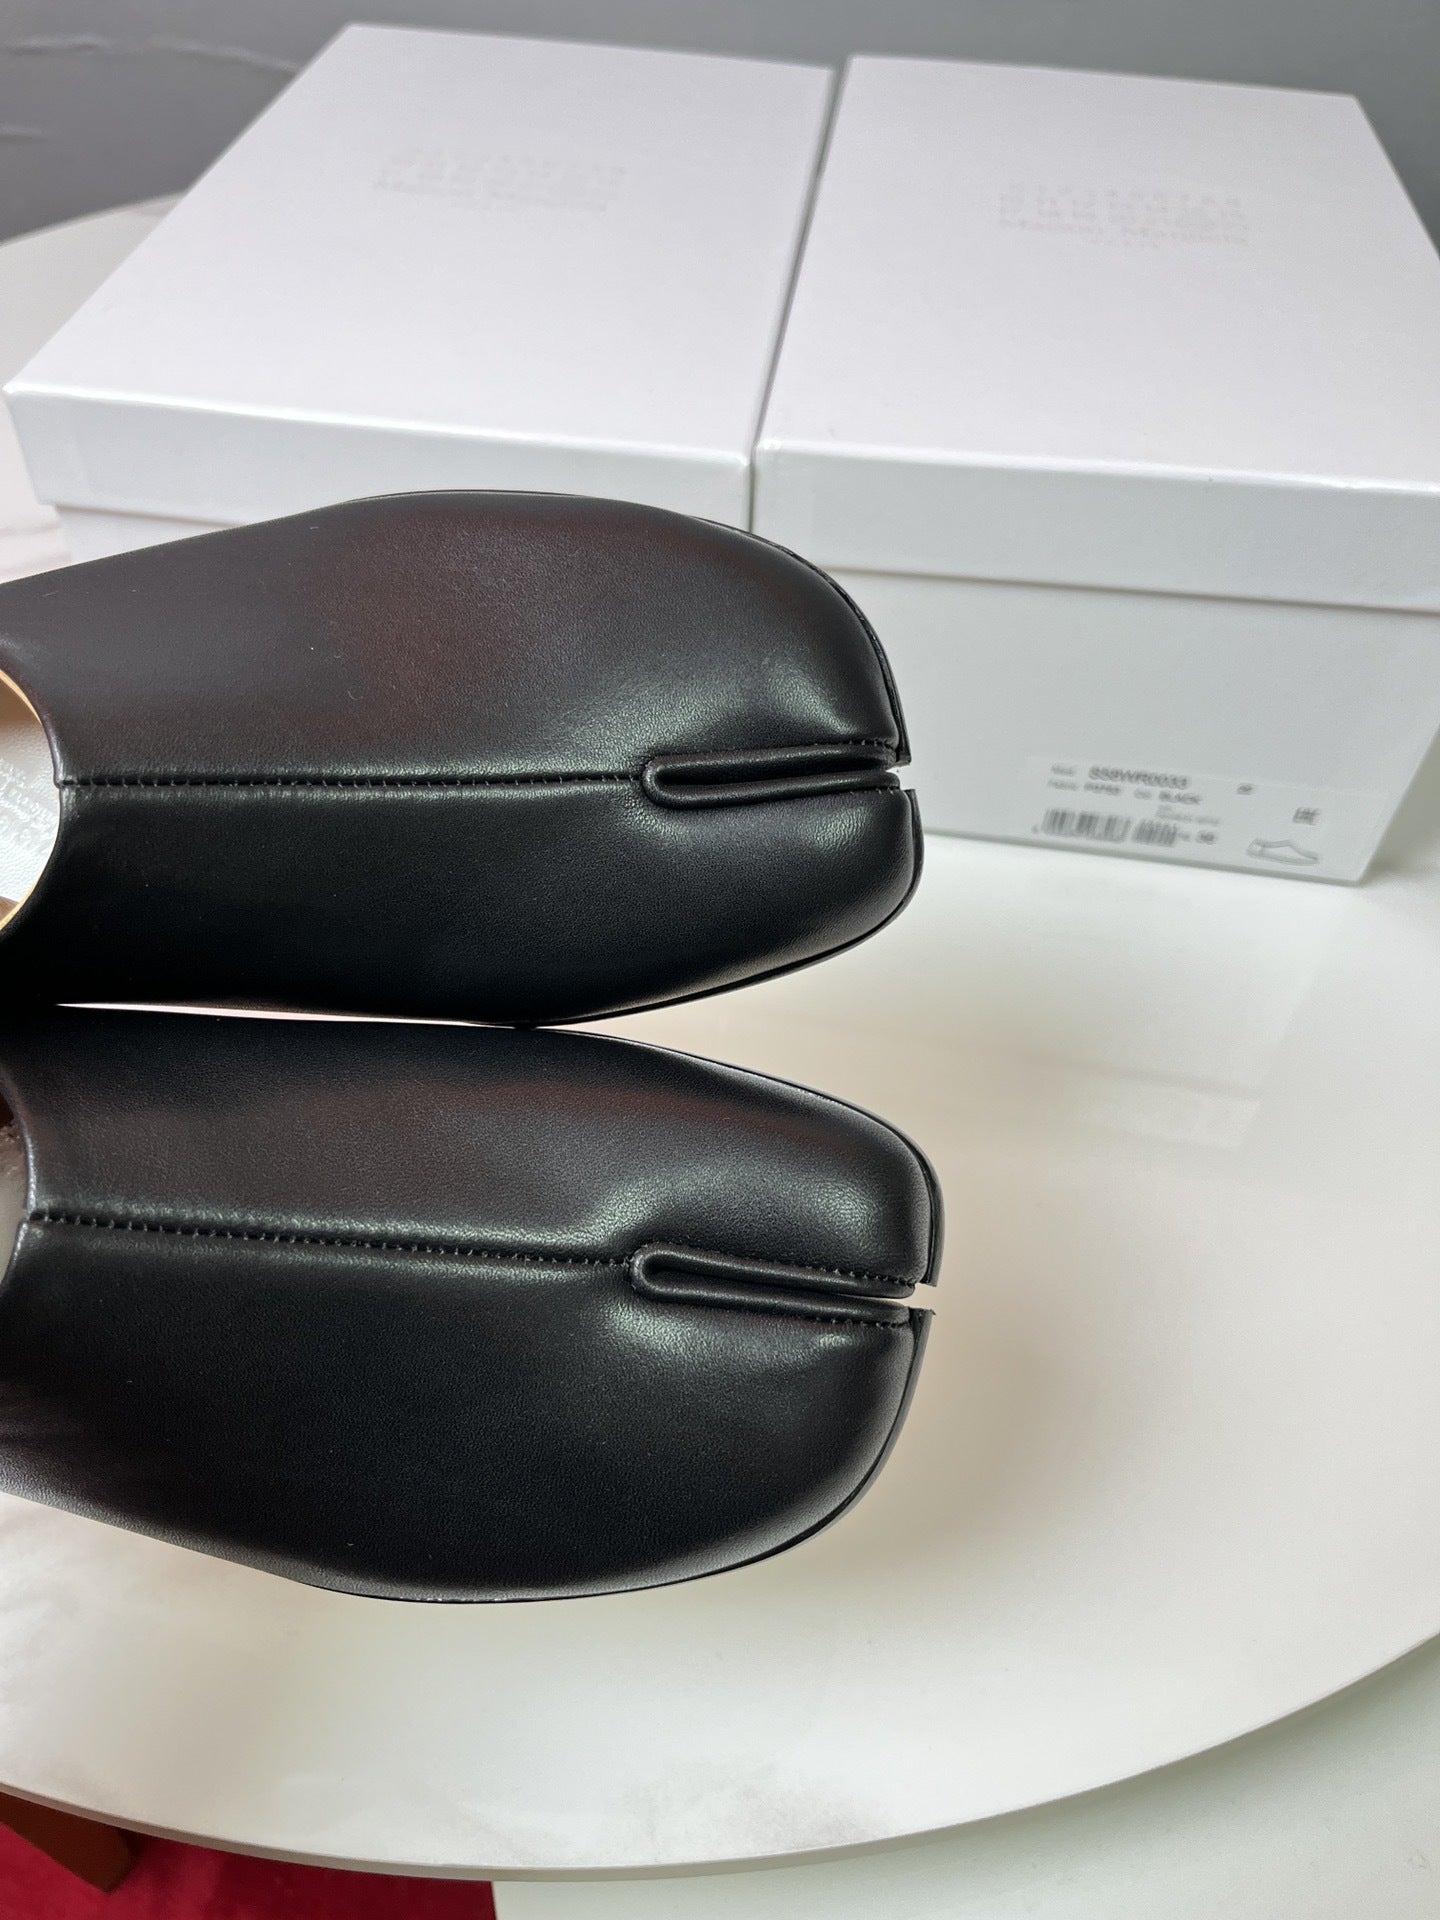 Single shoe made of genuine leather with flat sole for comfort